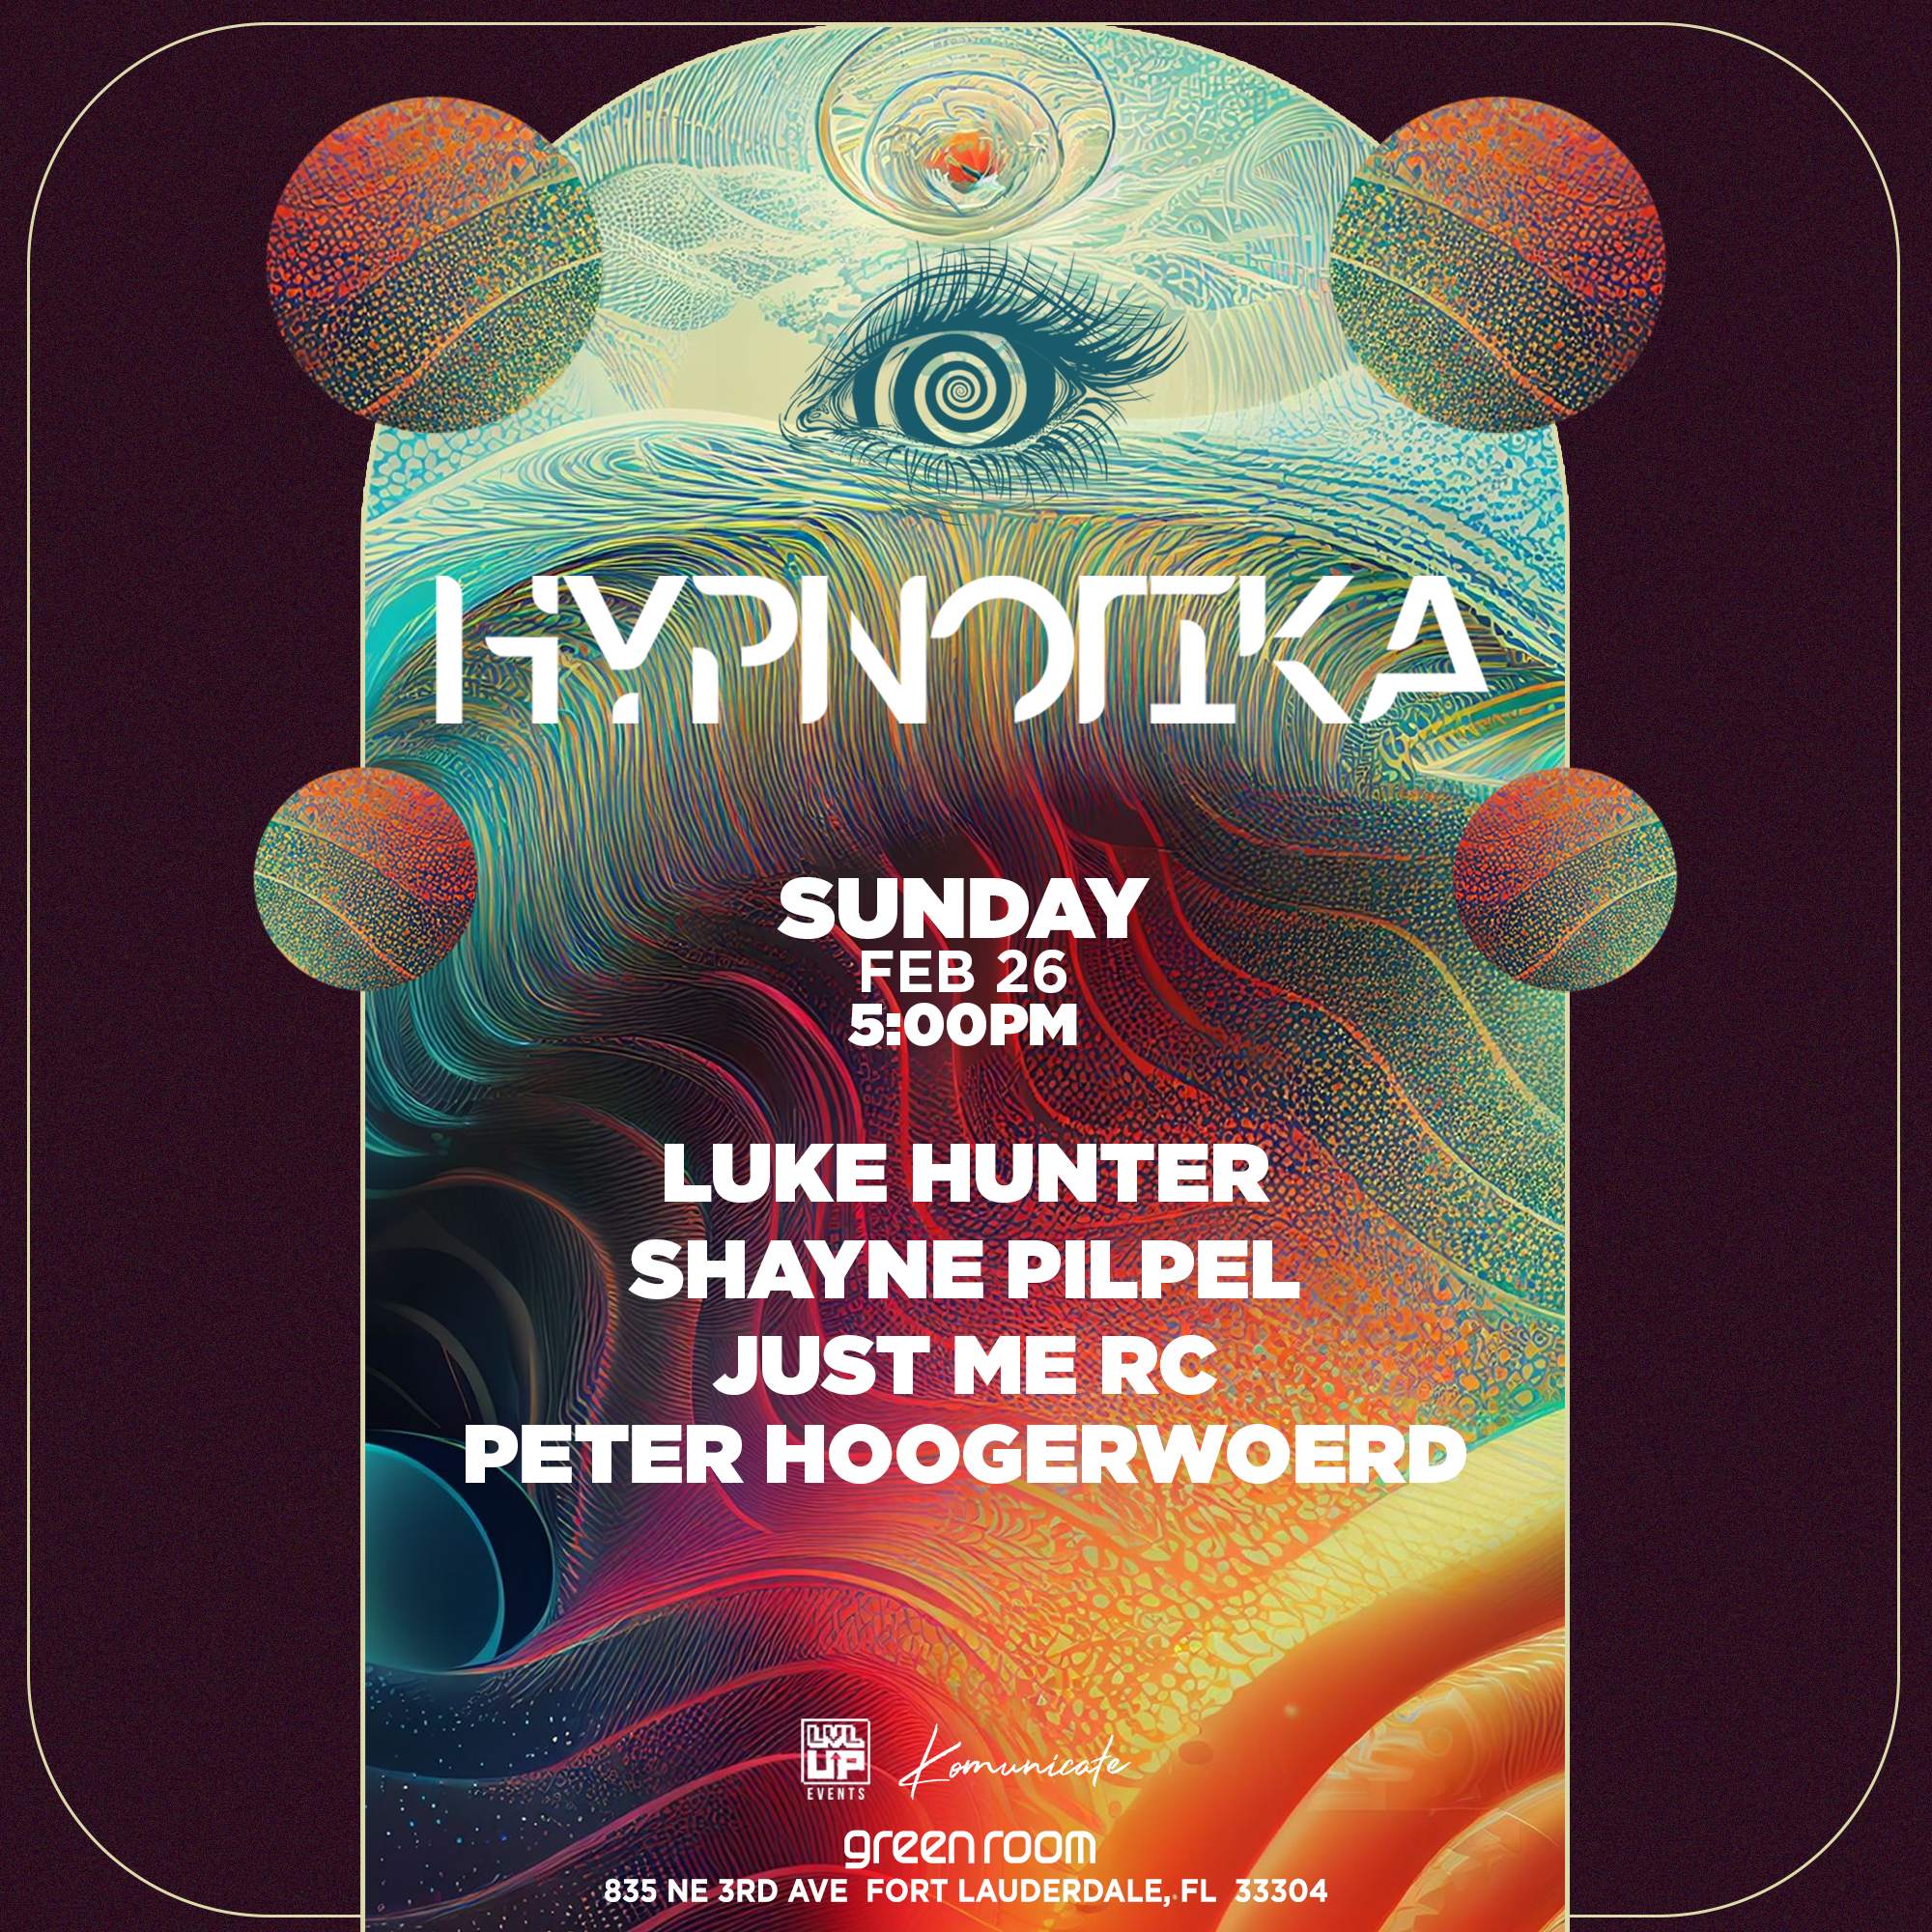 HYPNOTIKA at THE GREEN ROOM (FT Lauderdale) - フライヤー表